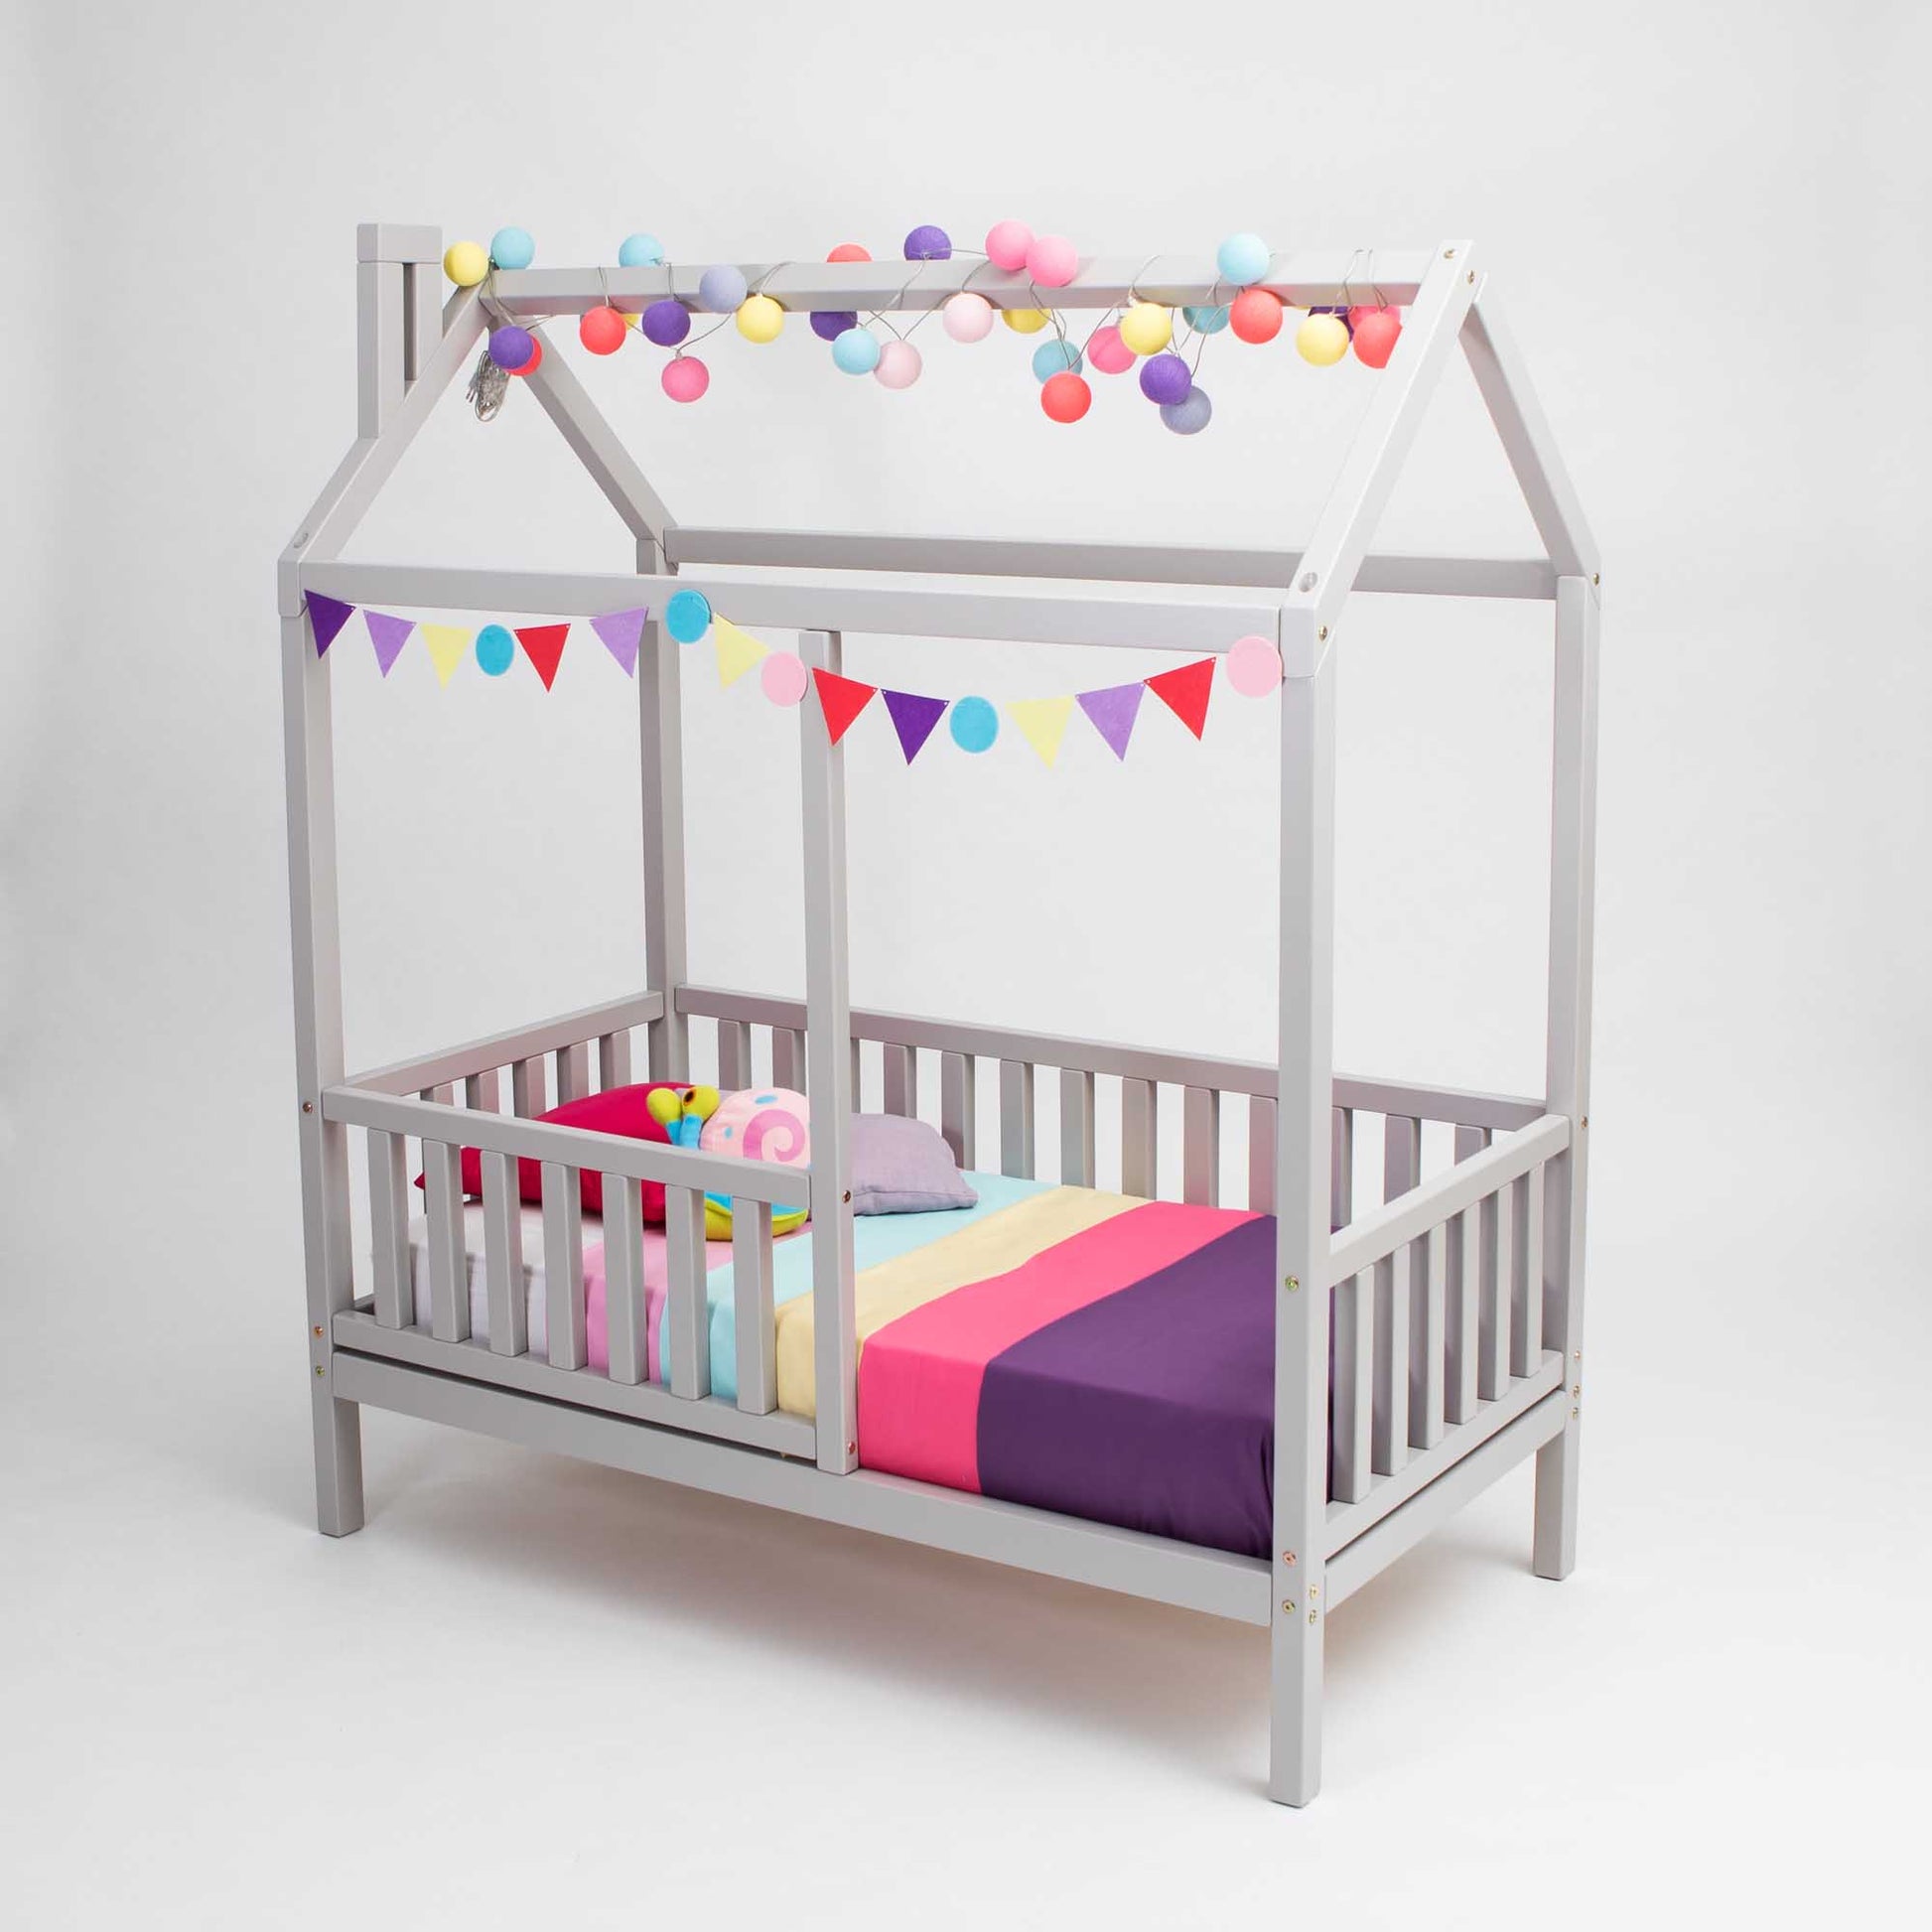 A Kids' house bed on legs with a fence with a colorful canopy and bunting.